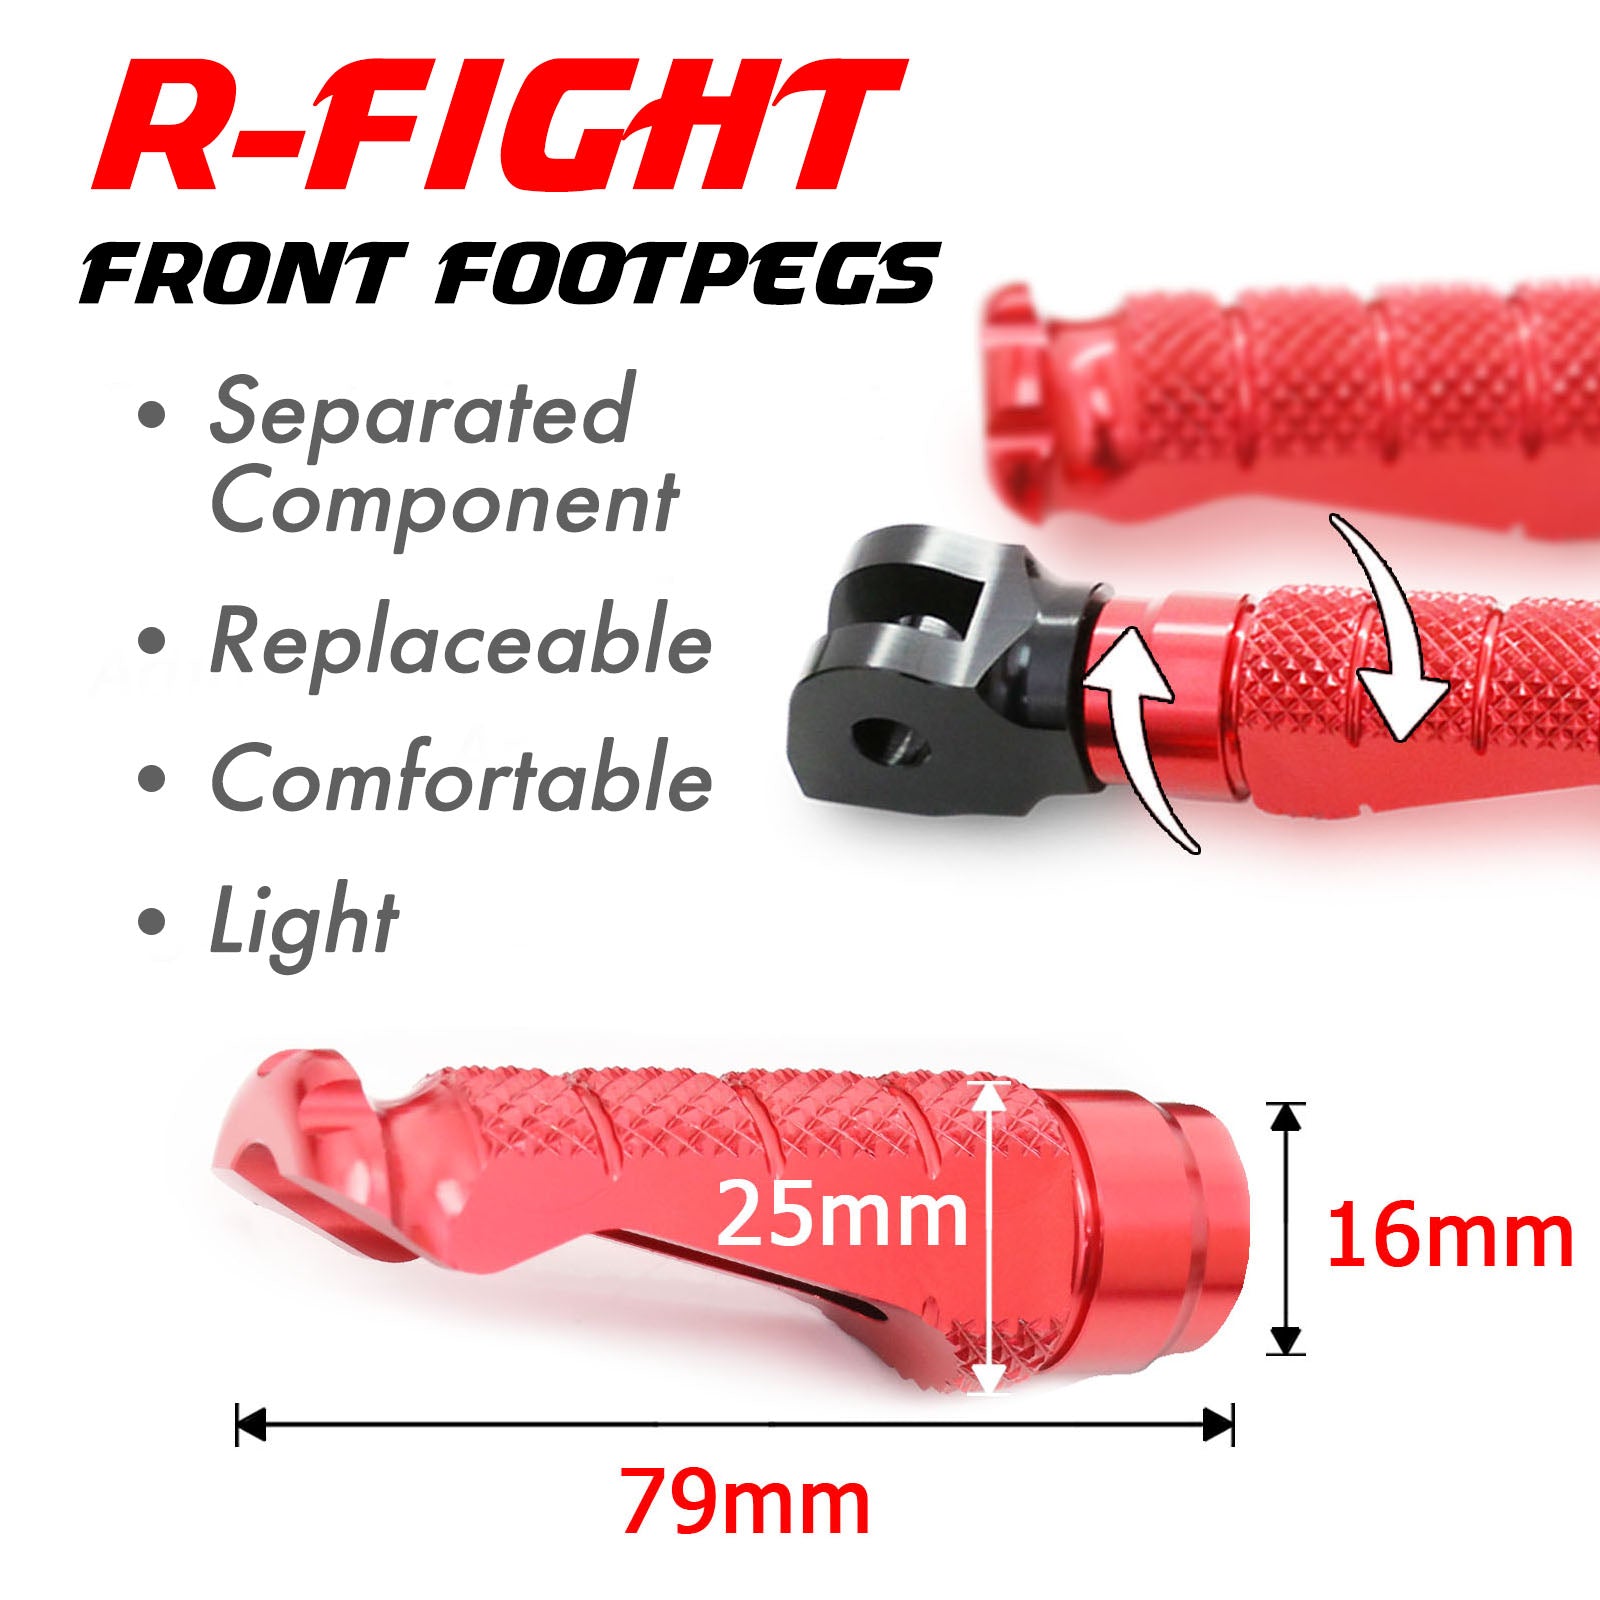 Fits Ducati Monster 600 821 S2R S4R RFIGHT Front Red Foot Pegs - MC Motoparts